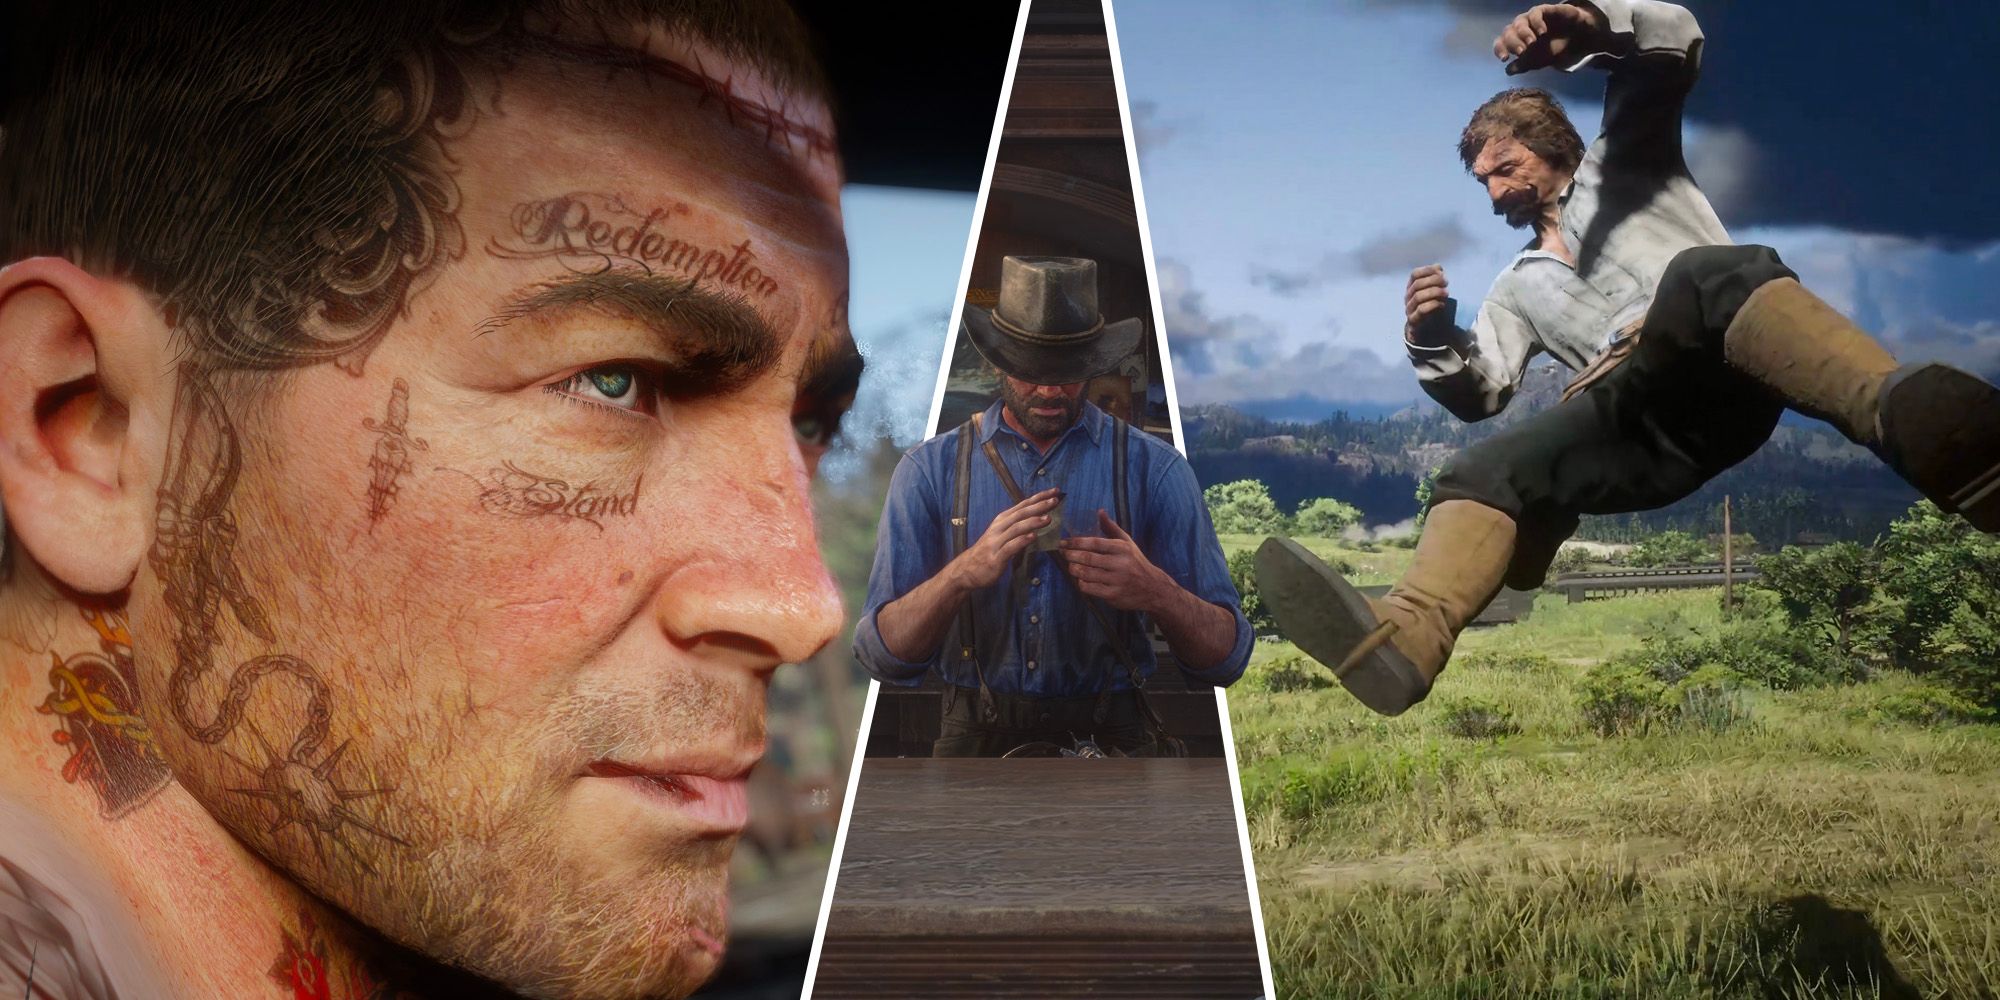 read dead redemption 2 face tattoo mod, arthur morgan working at the bar and an npc flying in the air